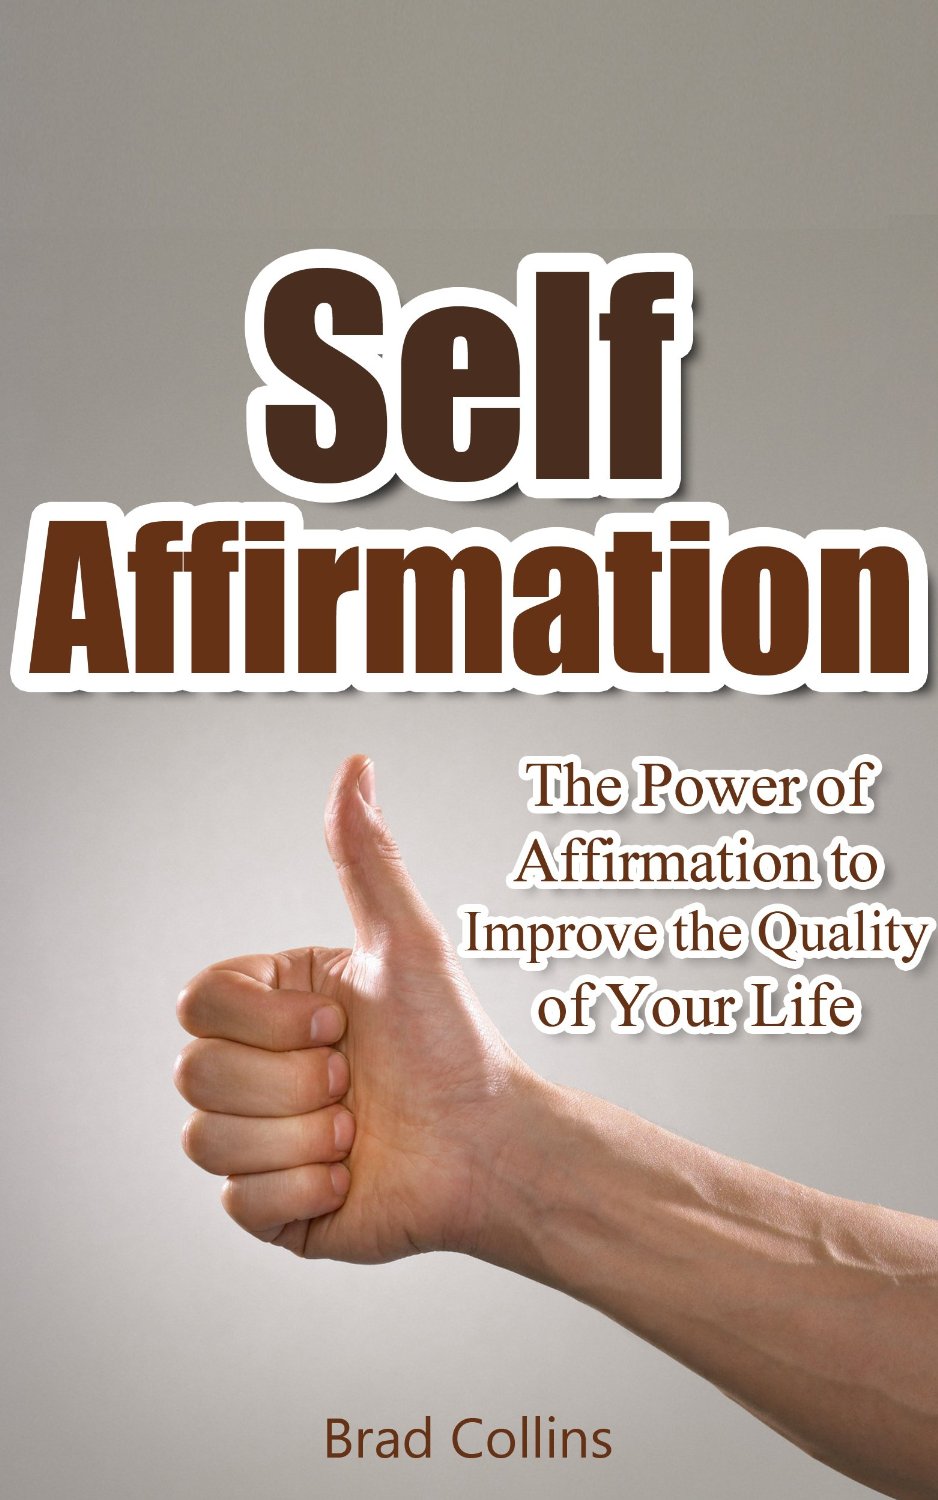 Self Affirmation – The Power of Affirmation to Improve the Quality of Your Life  By Brad Collins